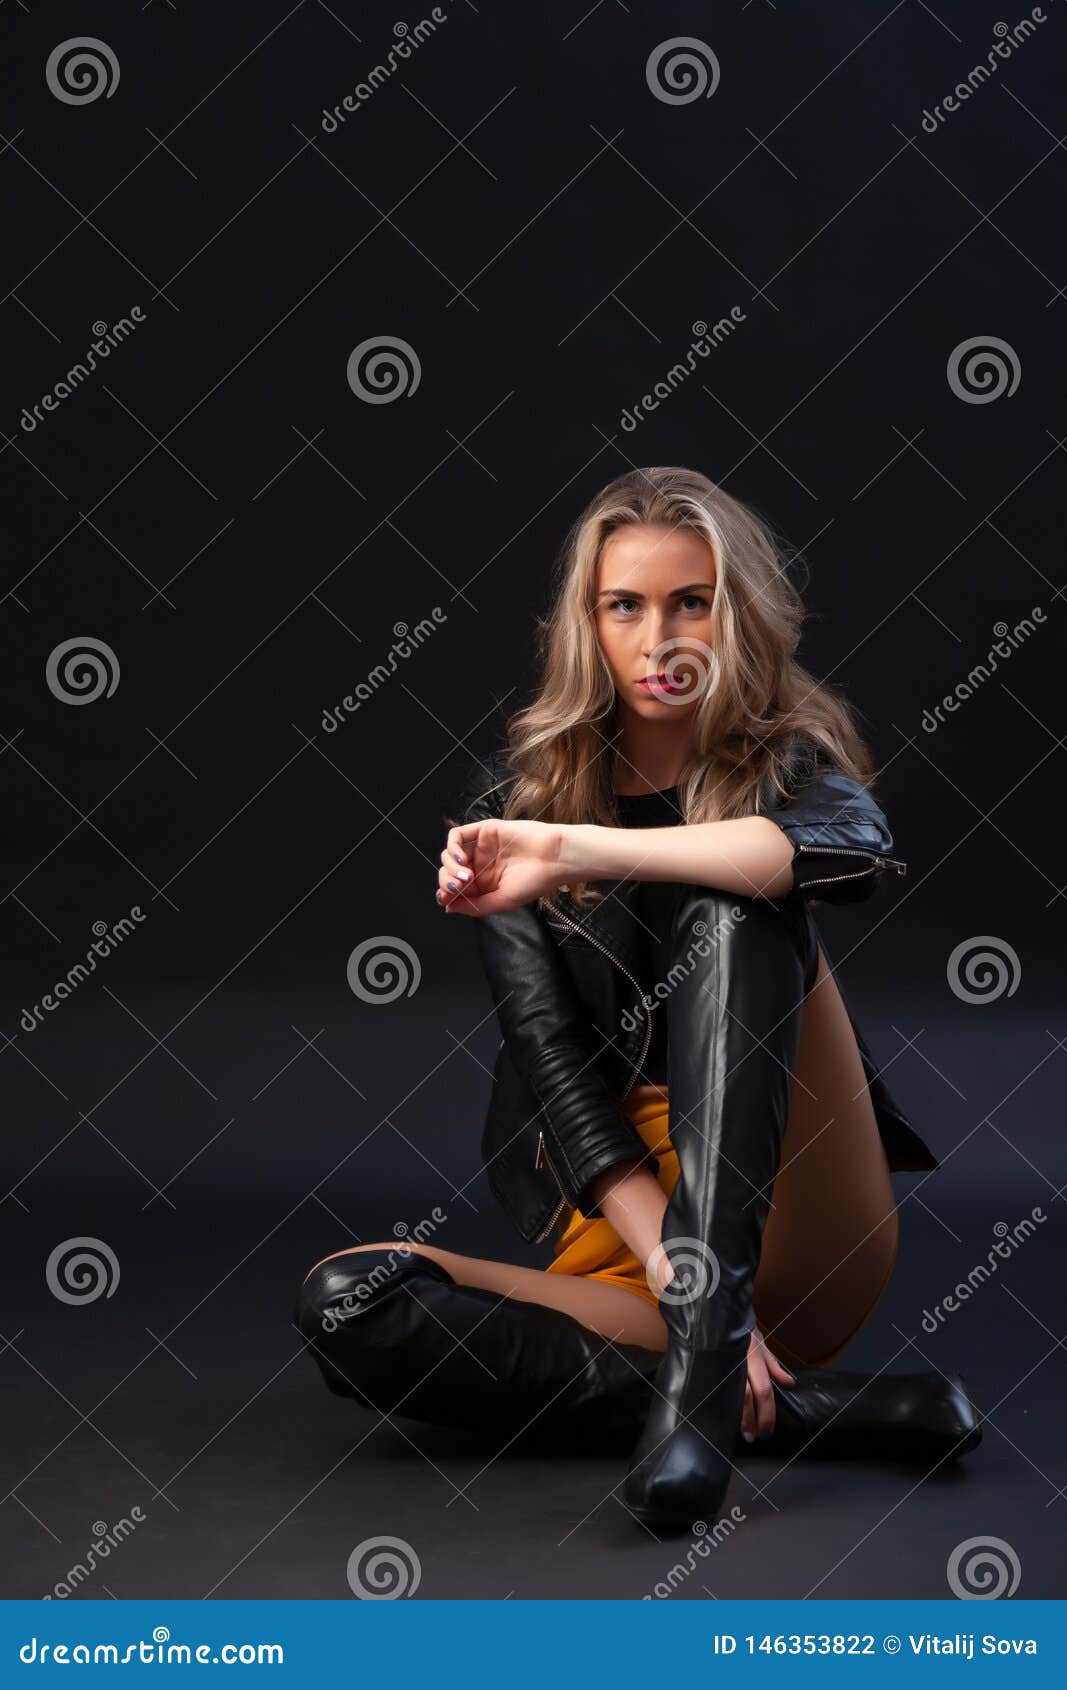 615 Sexy Woman Boots Skirt Stock Photos pic